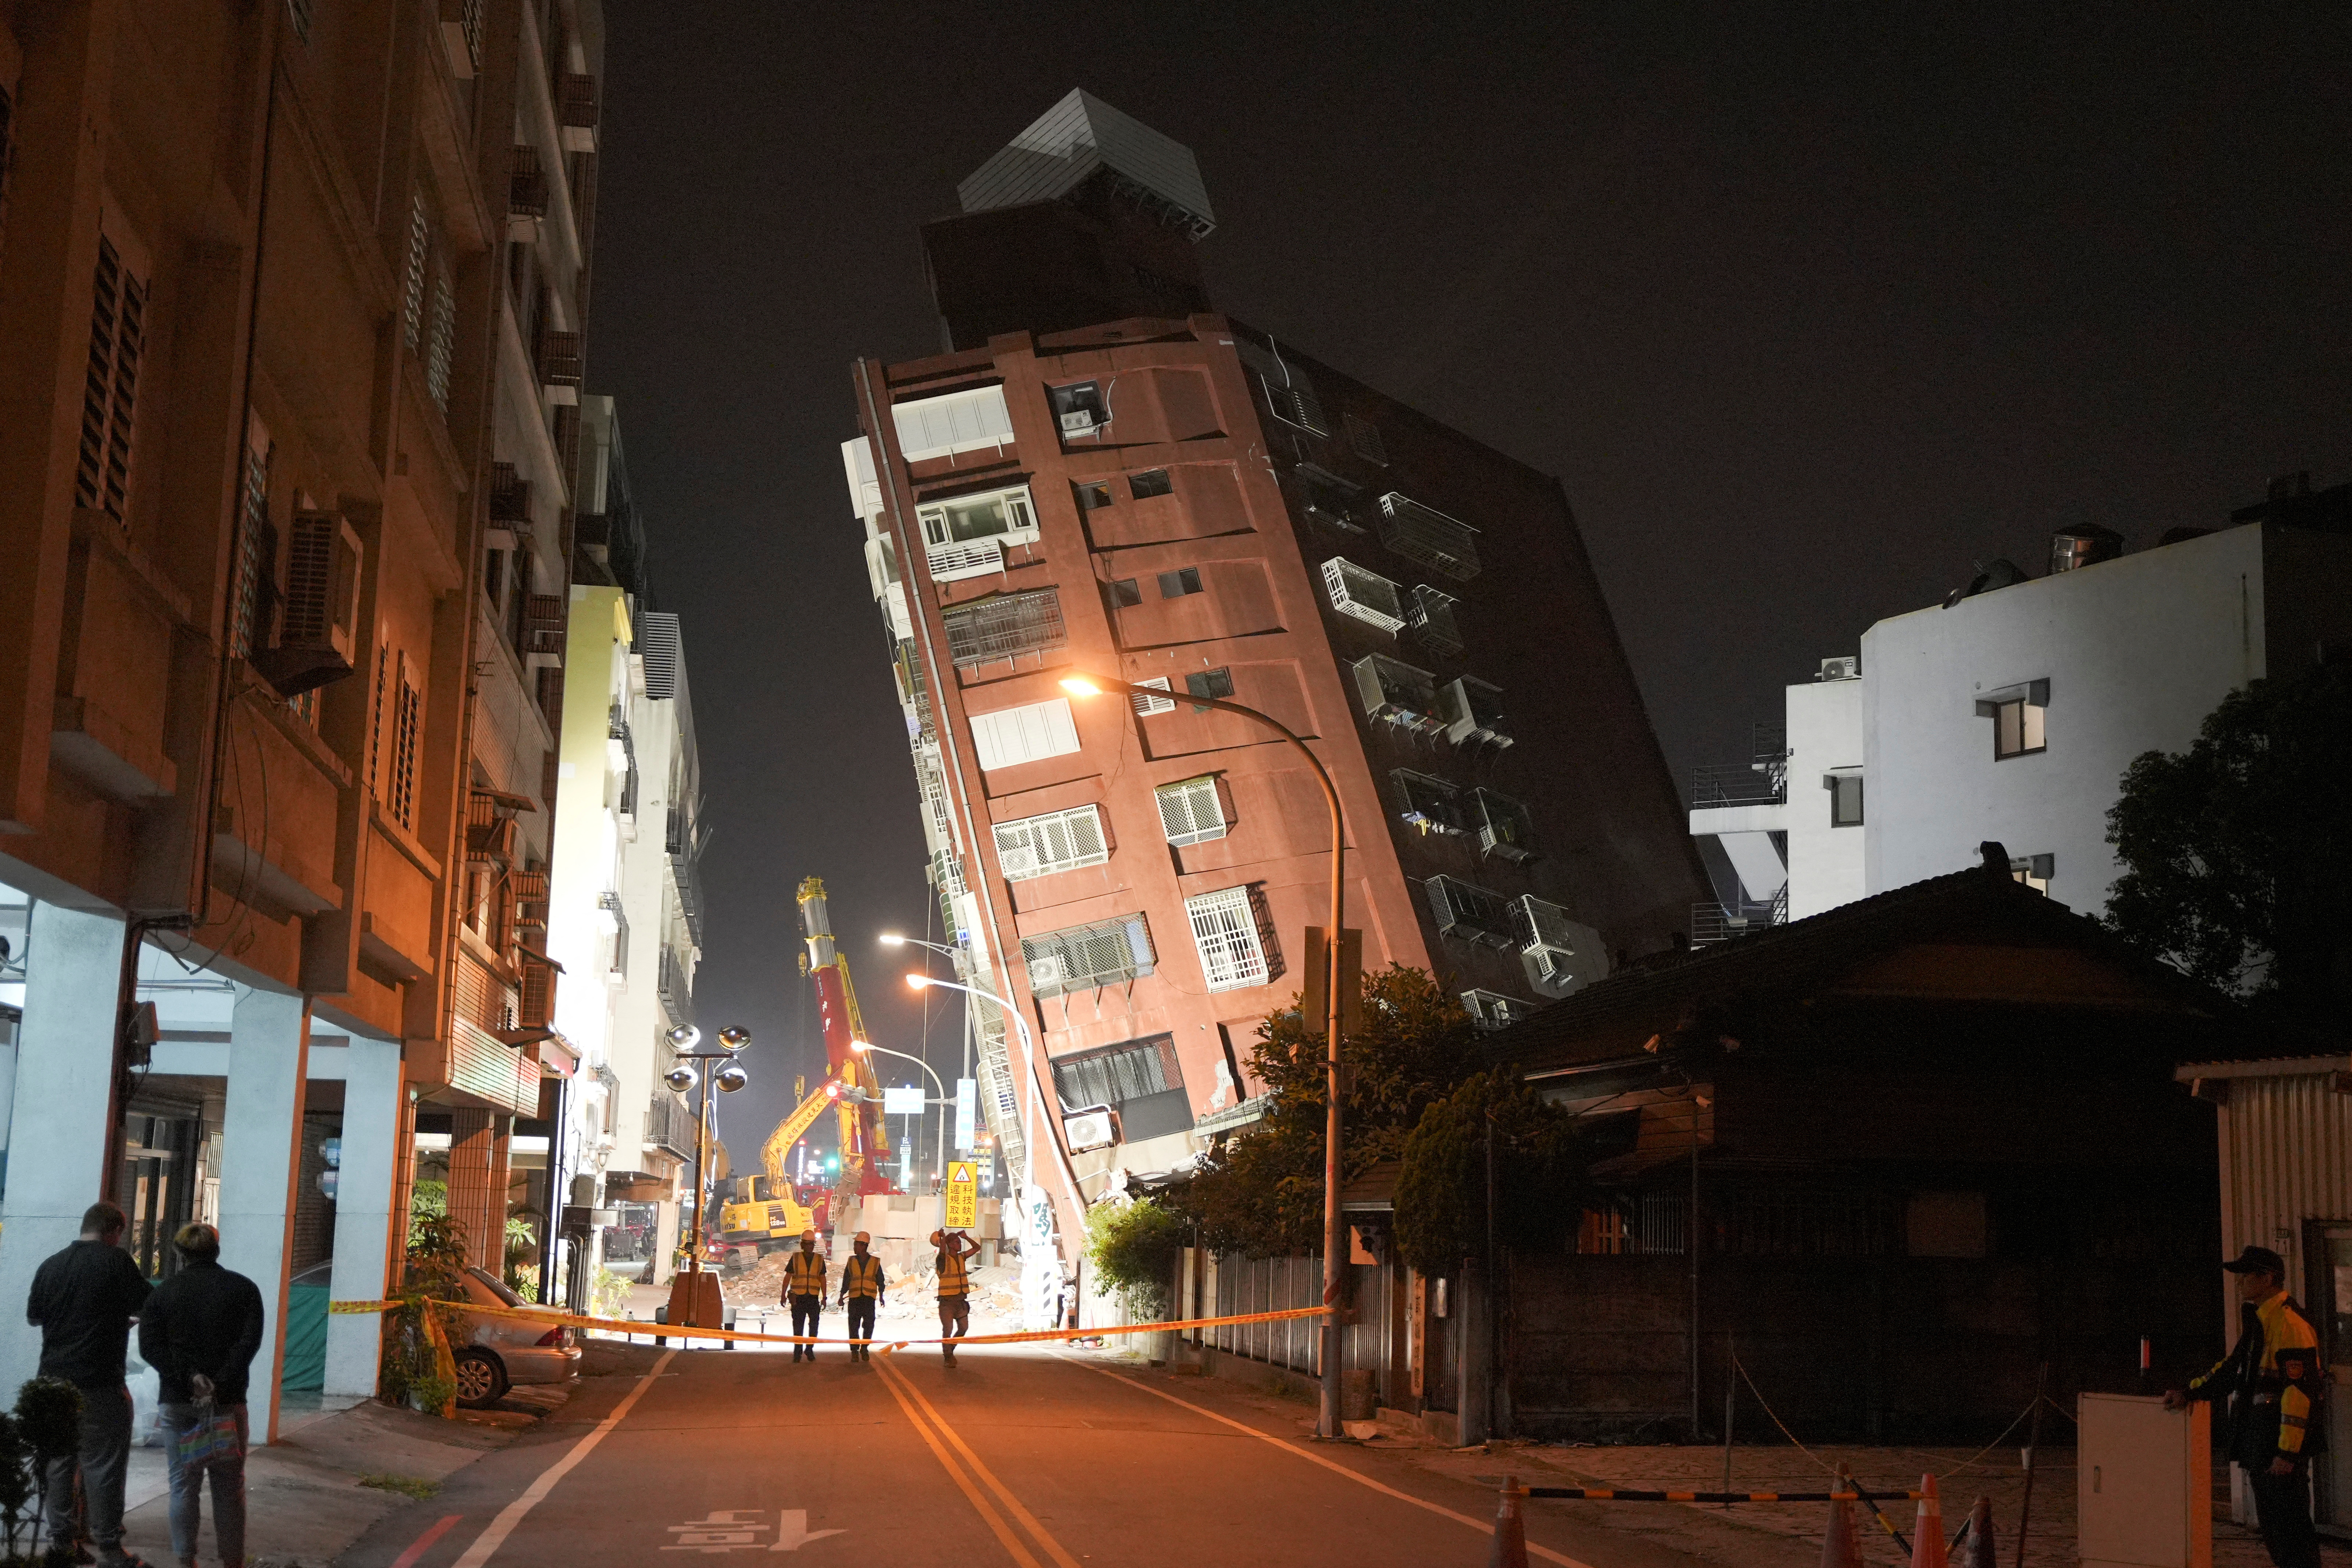 Workers walk at the site where a building collapsed following an earthquake, in Hualien